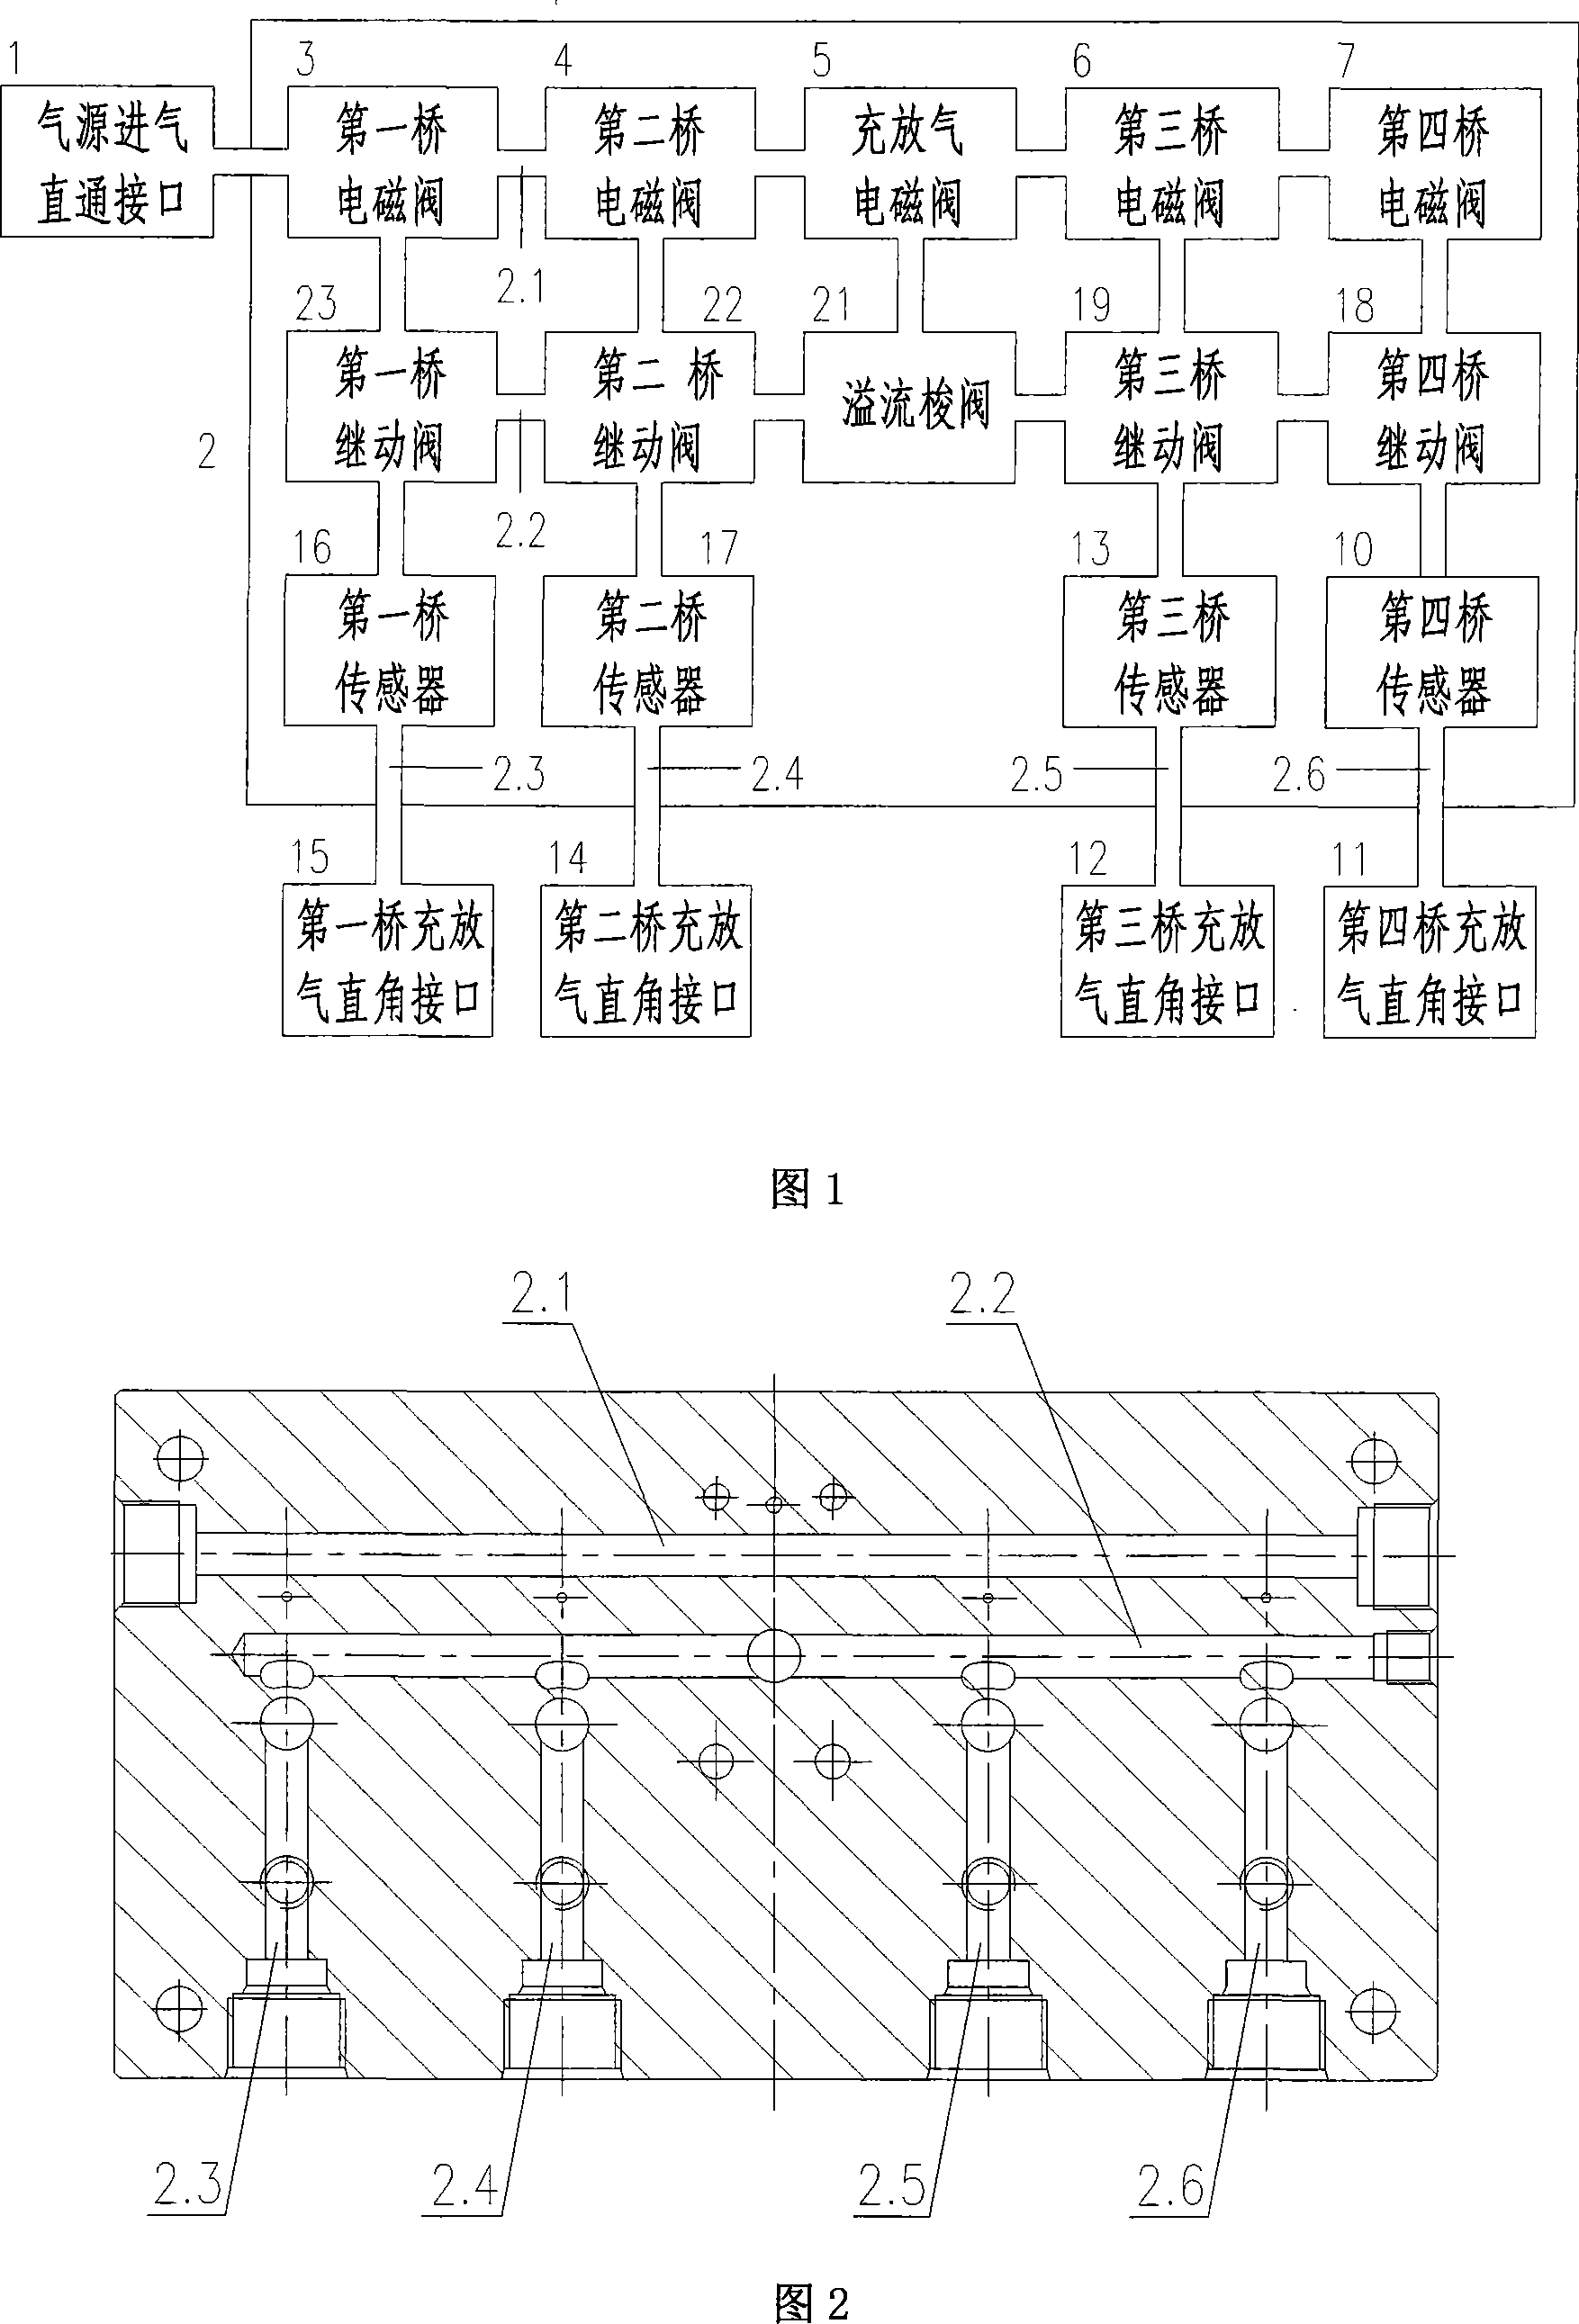 Central inflating and deflating control valve assembly for modeled cross-country vehicle tire